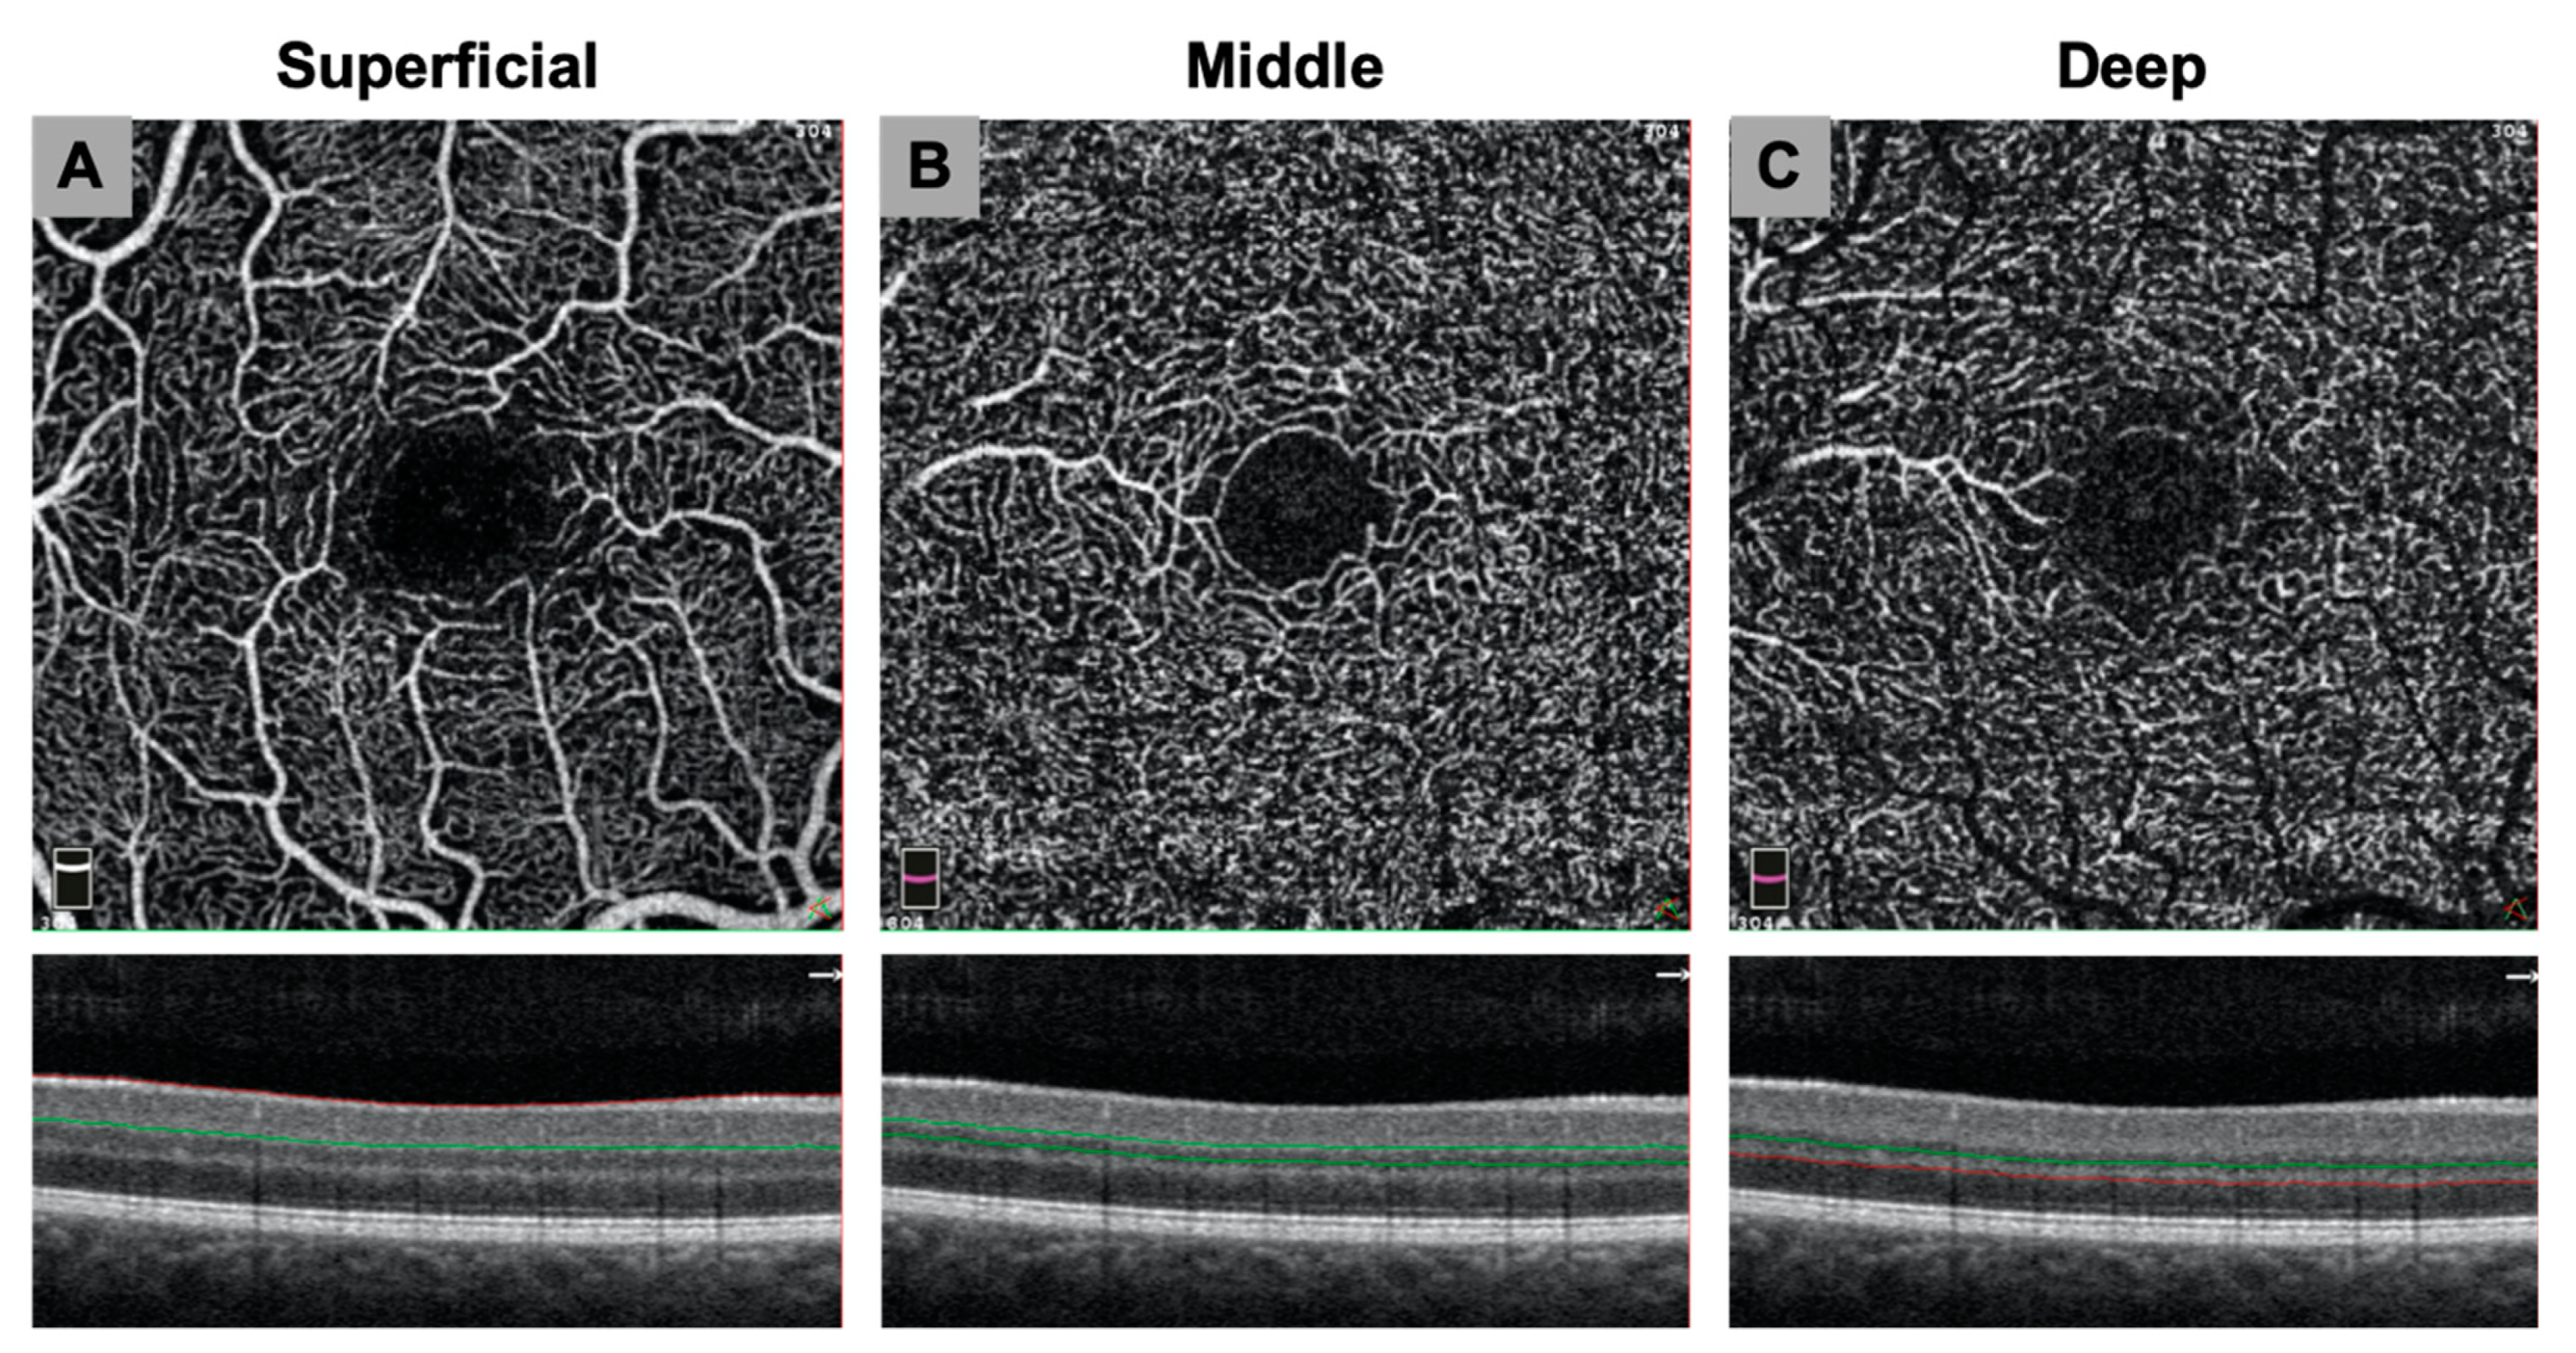 Altered ocular microvasculature in patients with systemic sclerosis and  very early disease of systemic sclerosis using optical coherence tomography  angiography